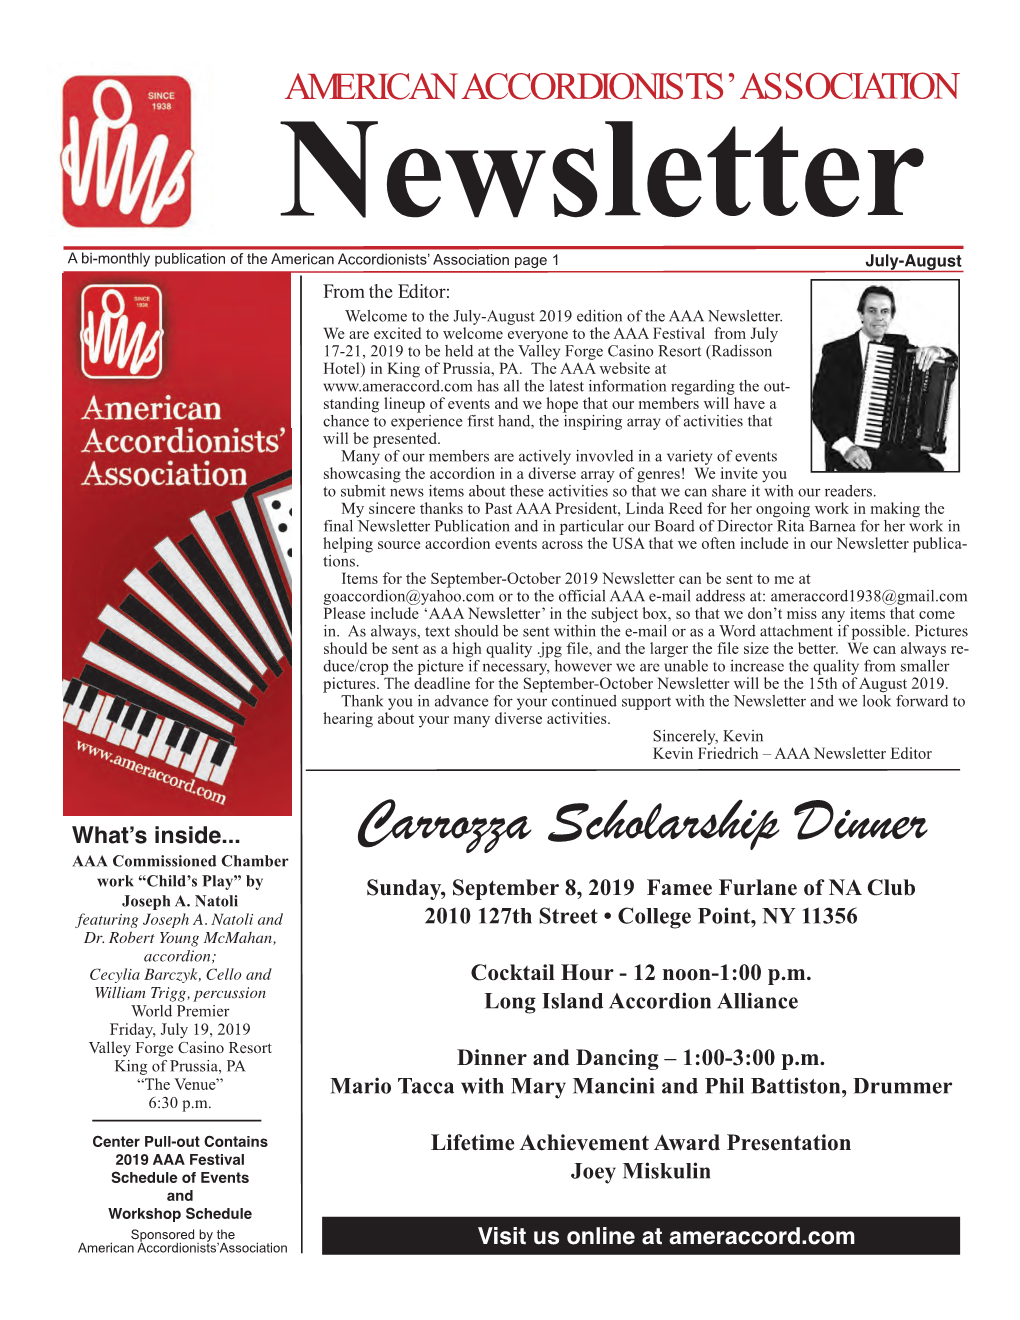 July-August from the Editor: Welcome to the July-August 2019 Edition of the AAA Newsletter